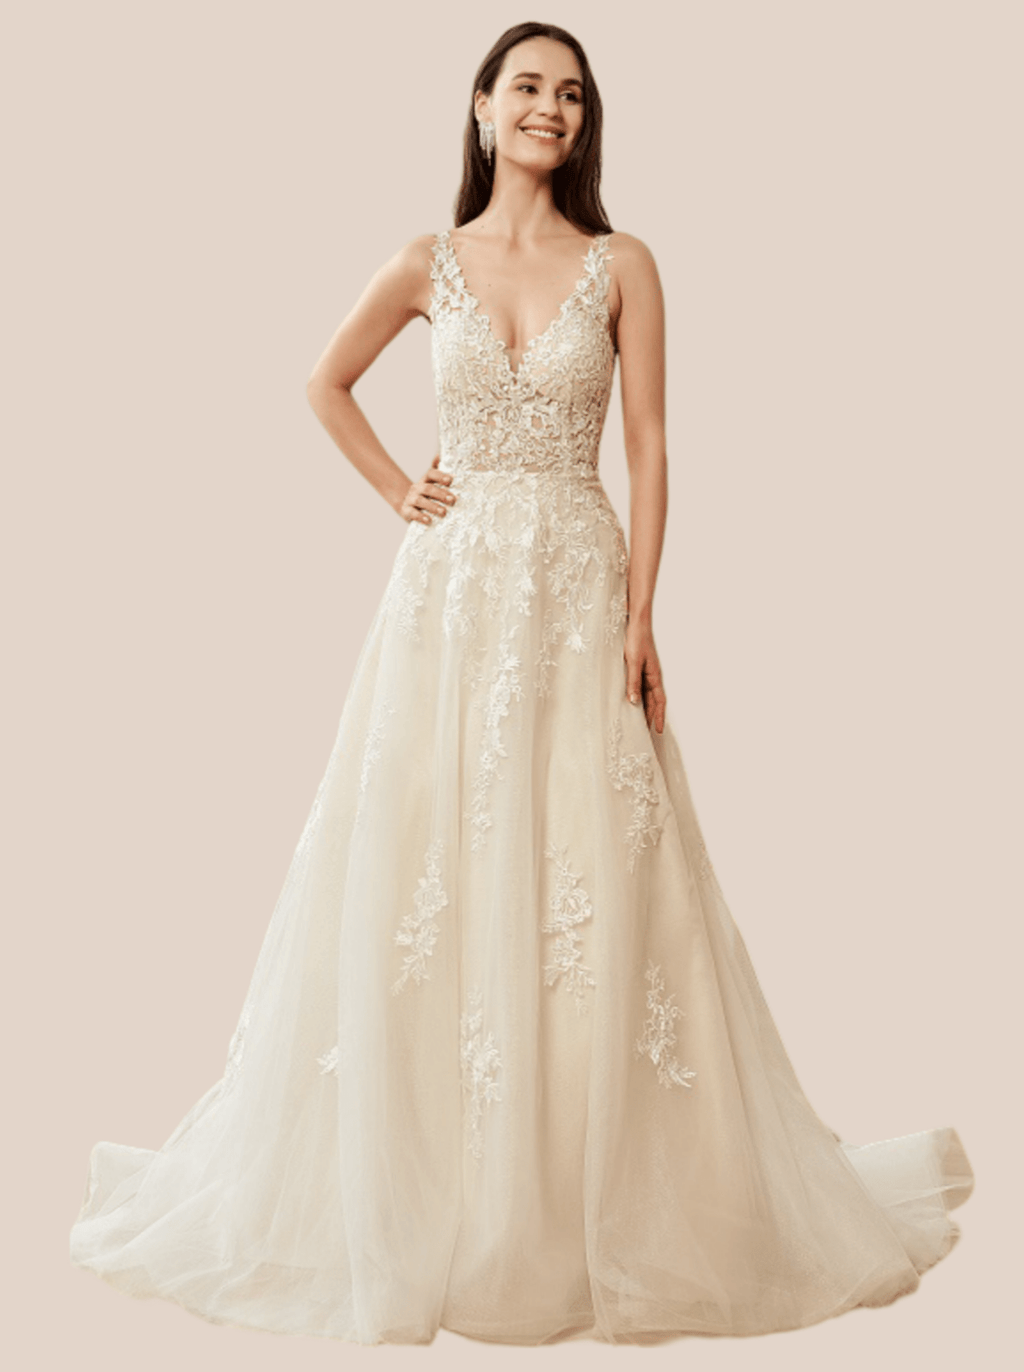 Annika applique lace wedding gown ivory on champagne s12-14 Express NZ wide - Bay Bridal and Ball Gowns